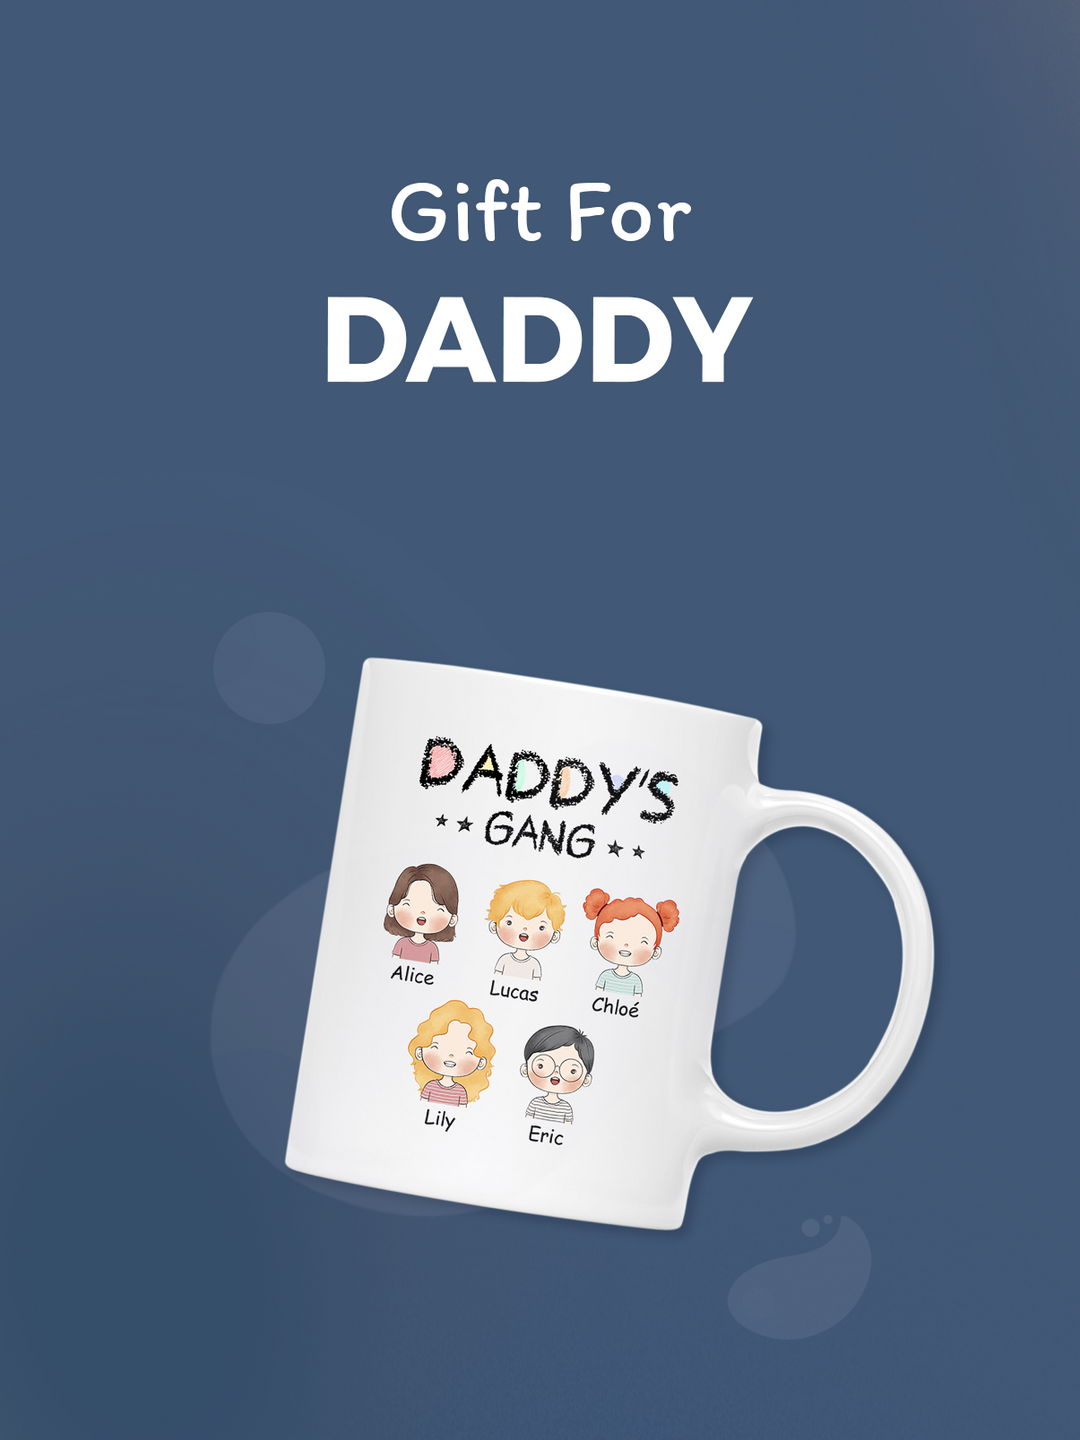 personal chic gift for daddy_cf921309 c67e 4872 ab03 e0fdc70459ae